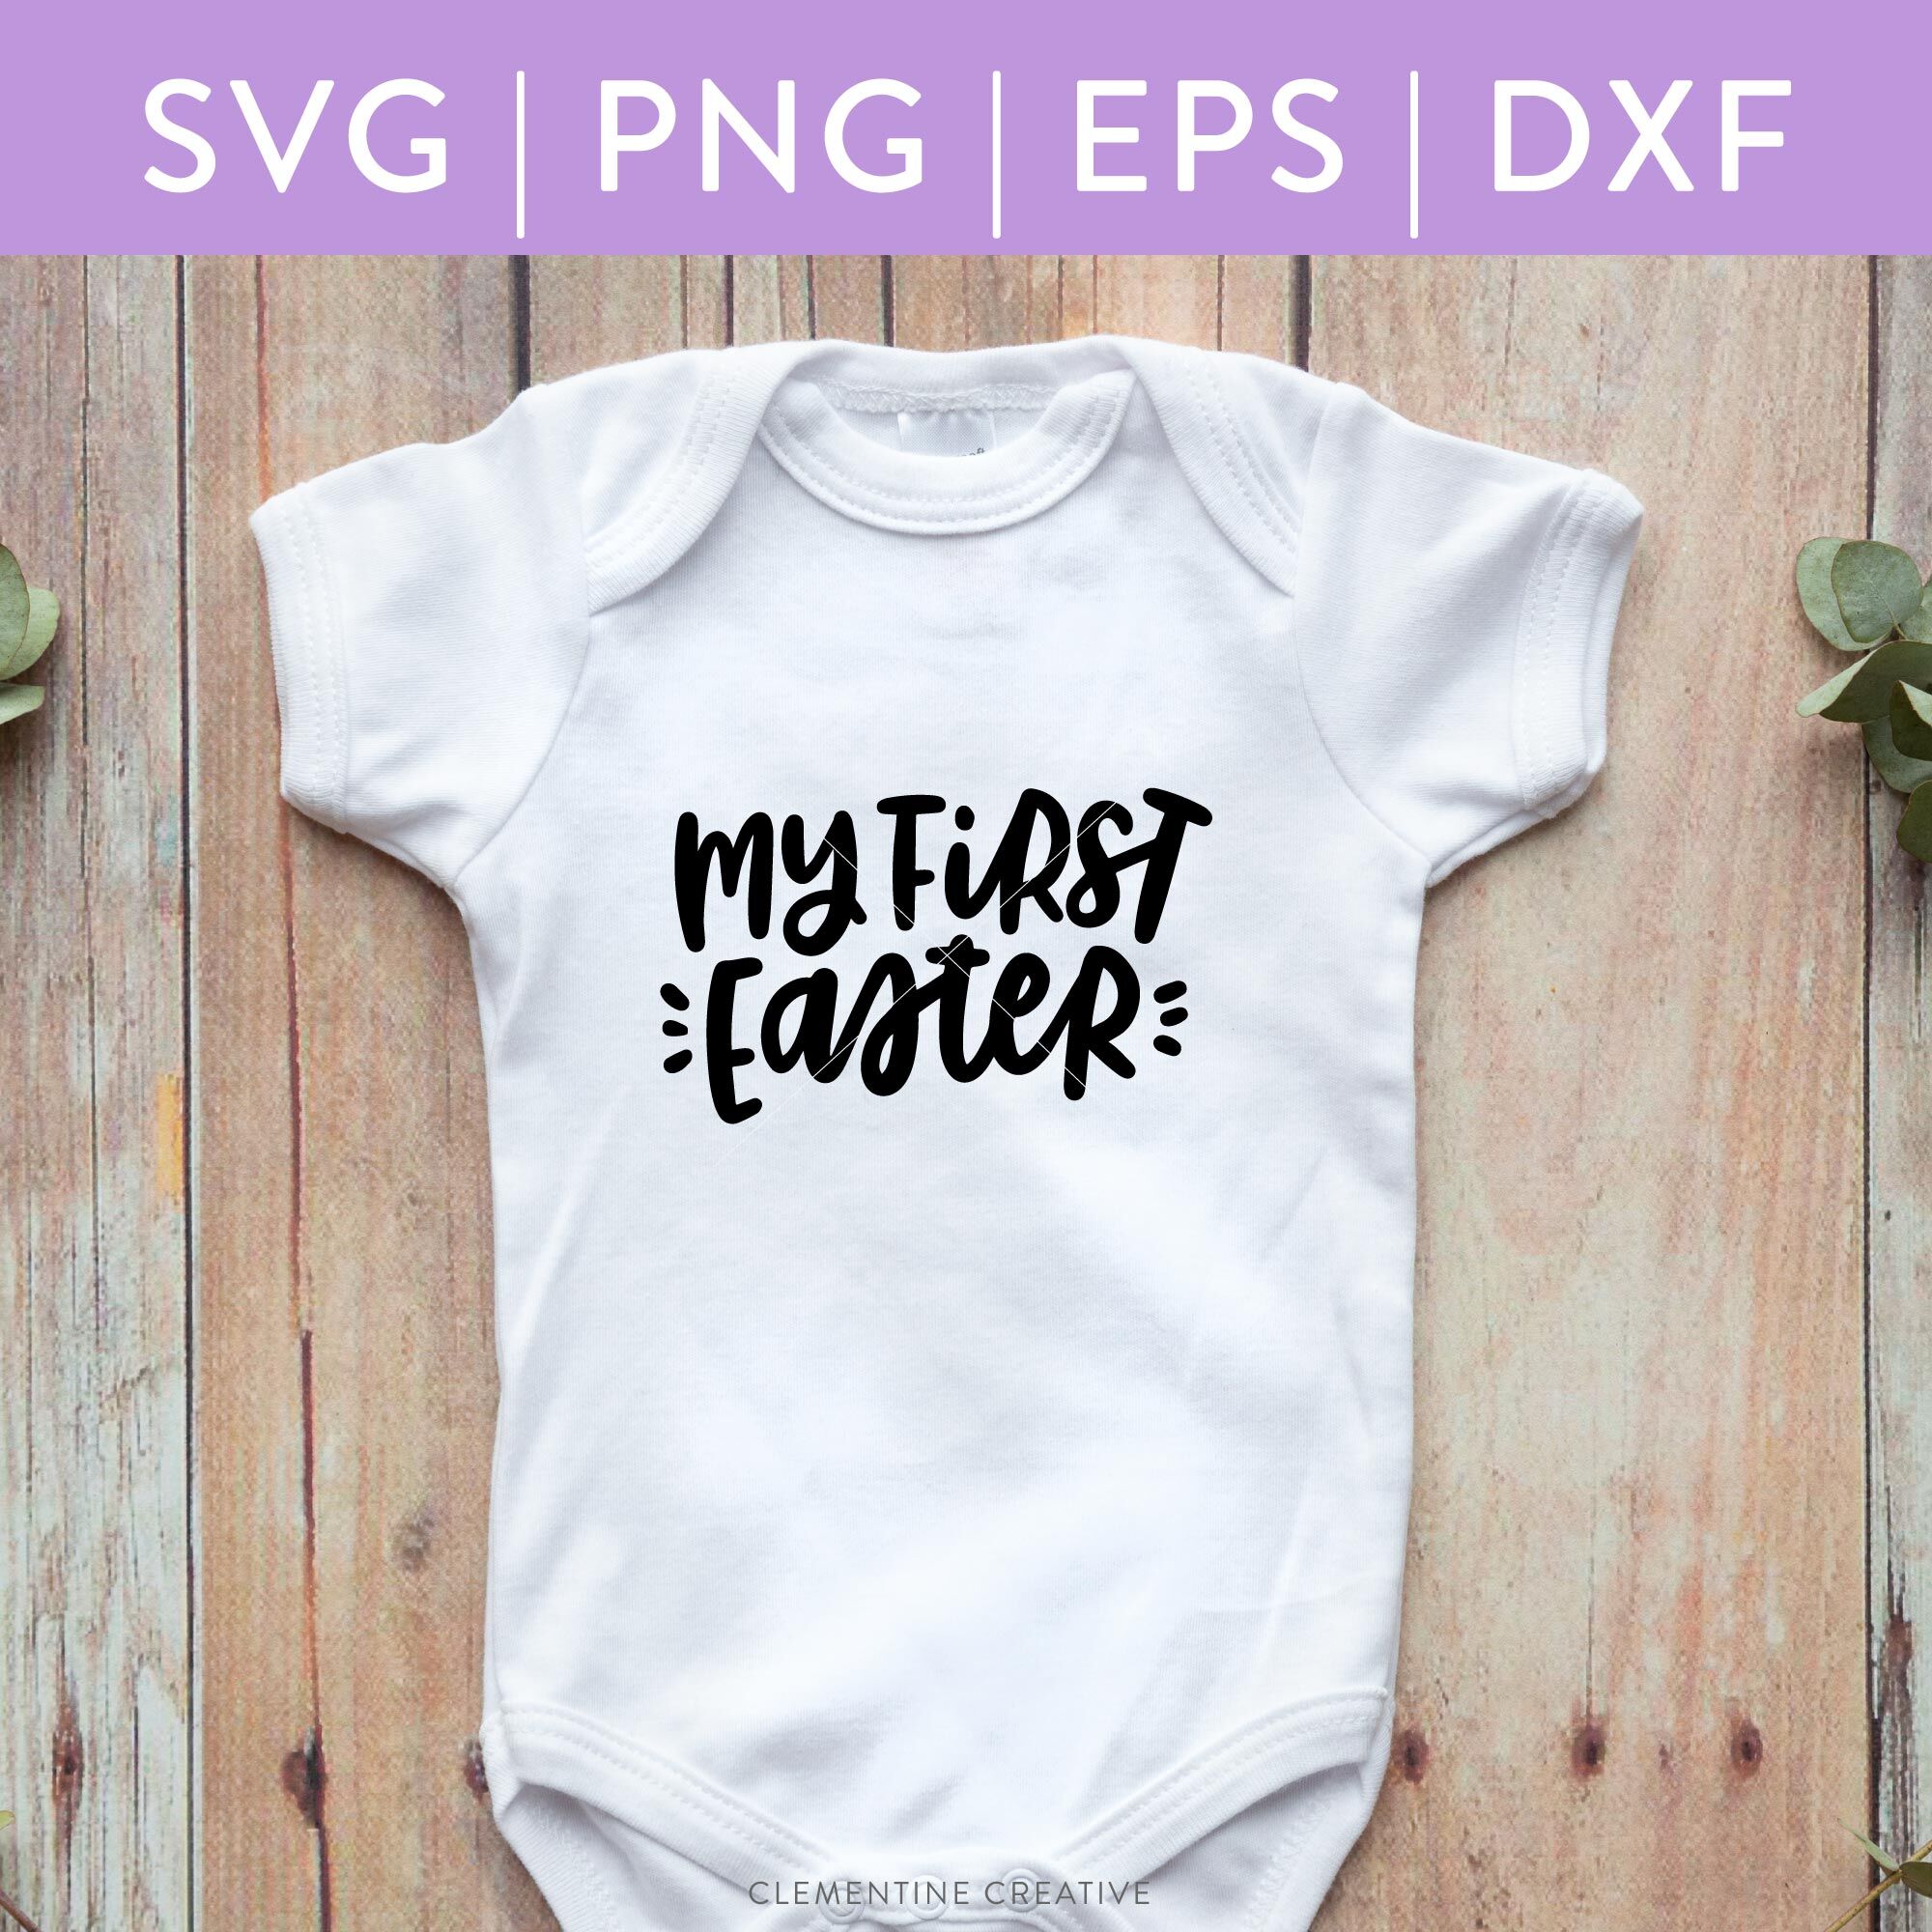 My First Easter Svg Baby S 1st Easter Svg By Clementine Creative Thehungryjpeg Com